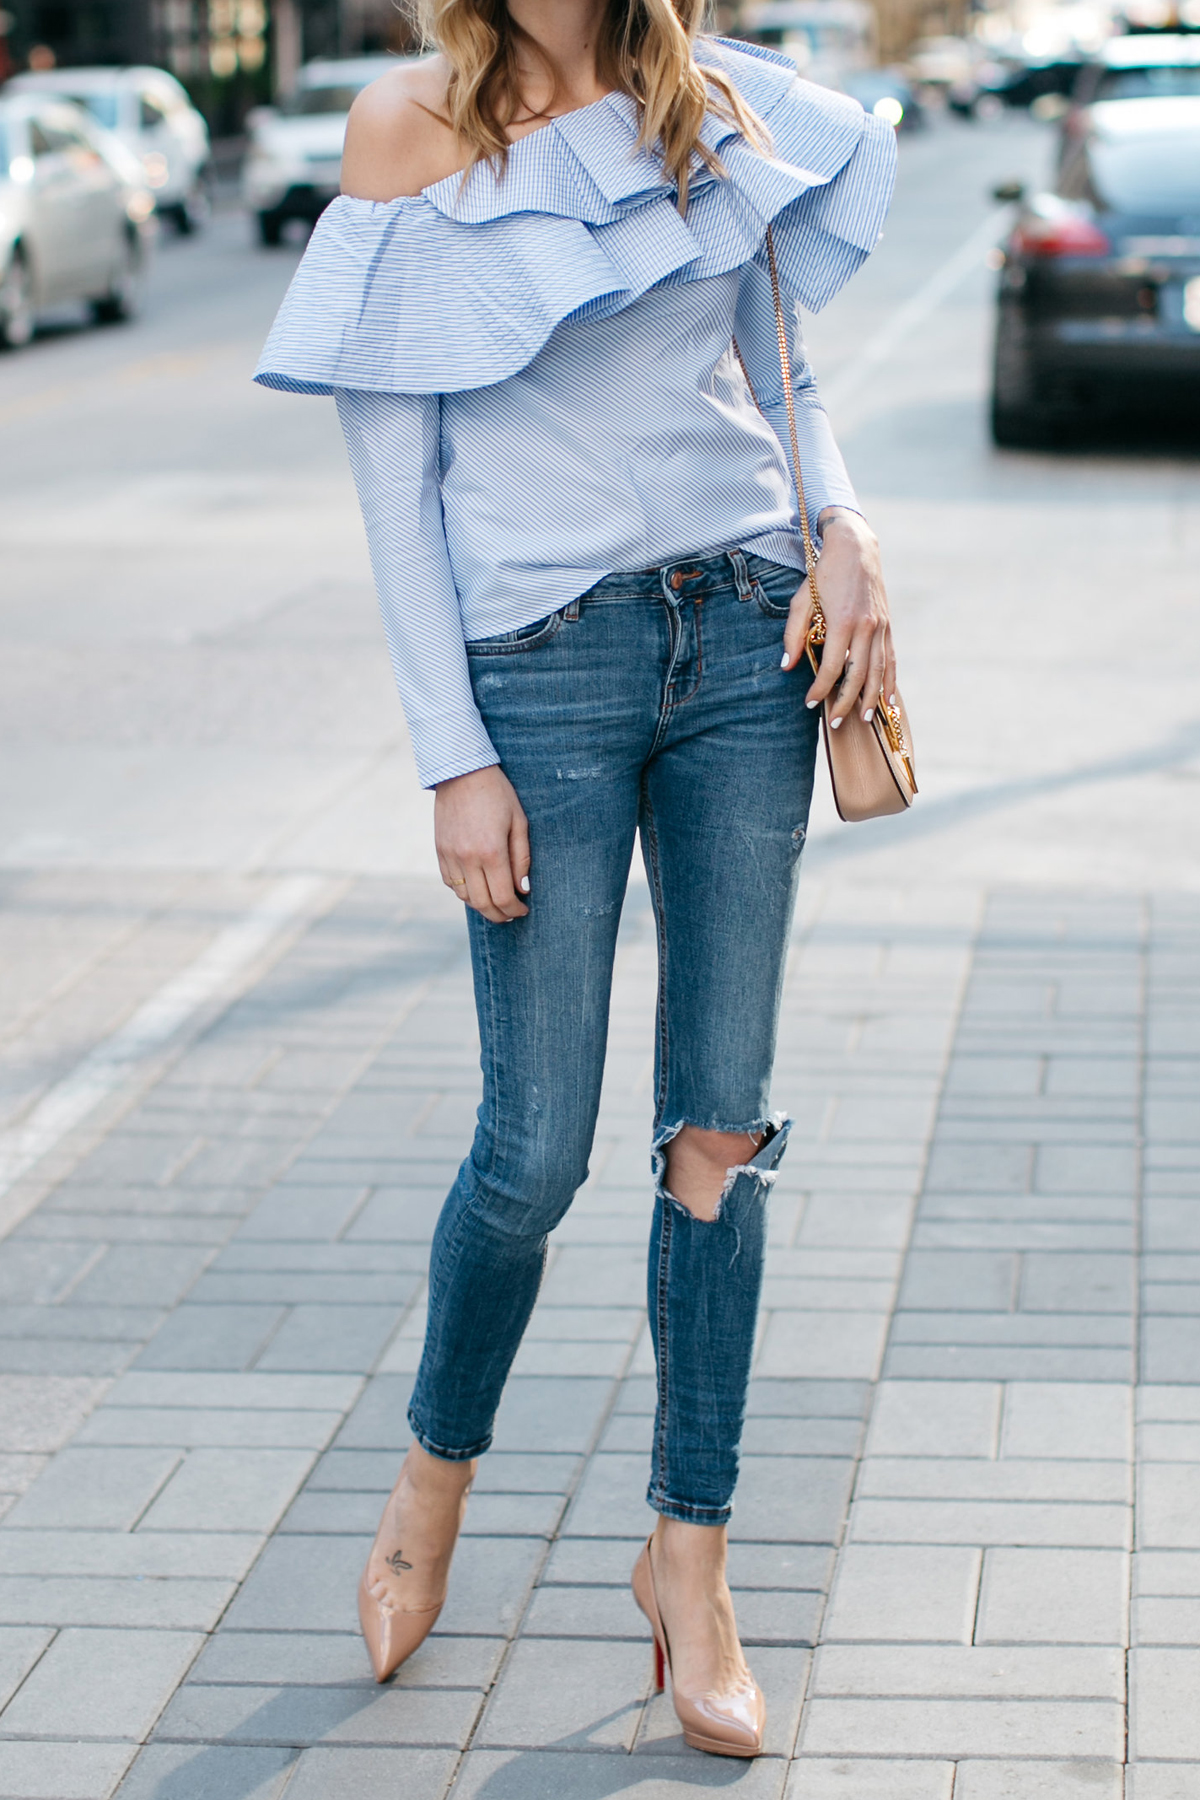 Spring Outfit, One Shoulder Ruffle Sleeve Top, Denim Ripped Skinny Jeans, Chloe Drew Handbag, Christian Louboutin Nude Pumps